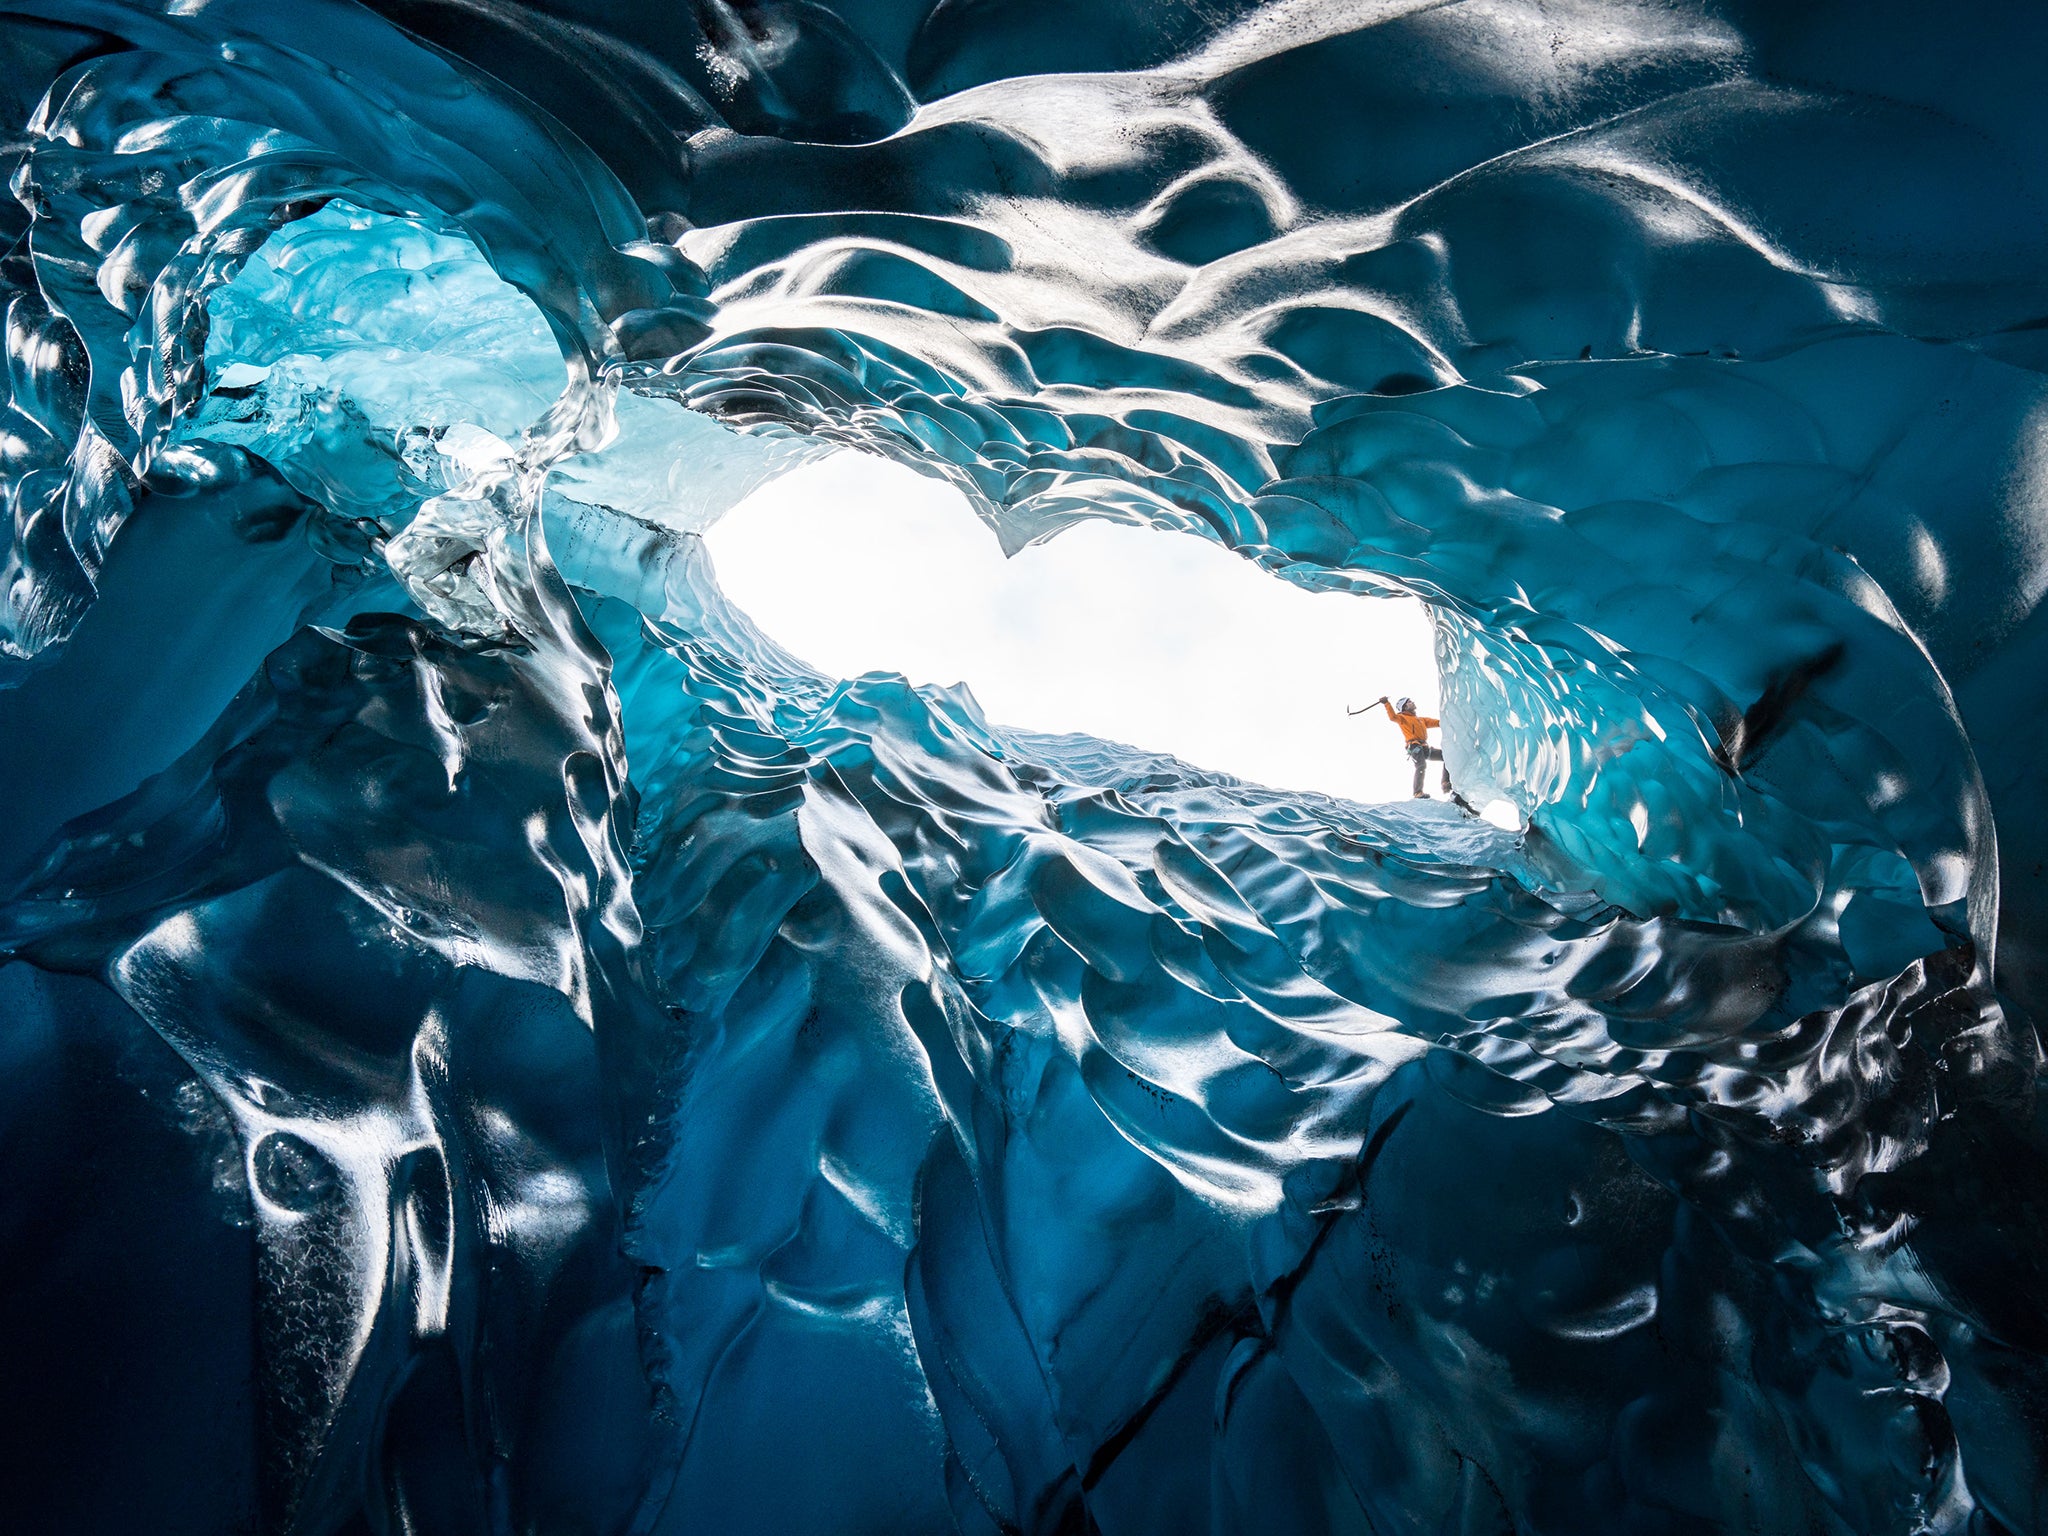 Mikael Buck's photographs of Iceland's caves are truly awe-inspiring